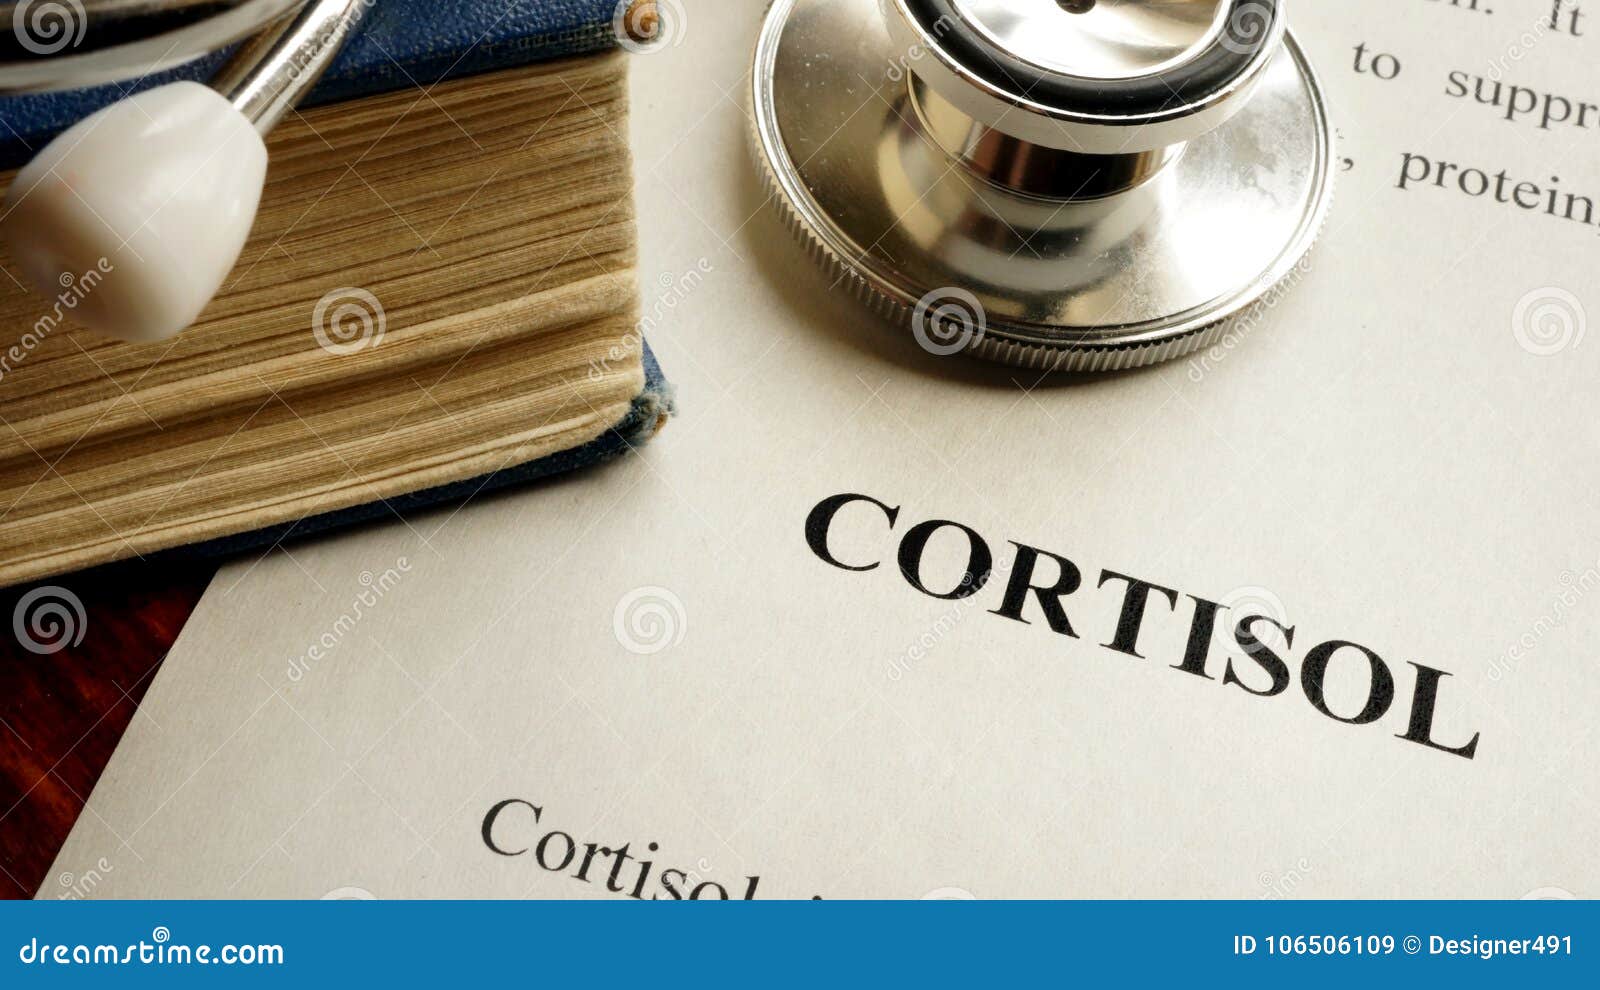 title cortisol written on a page.